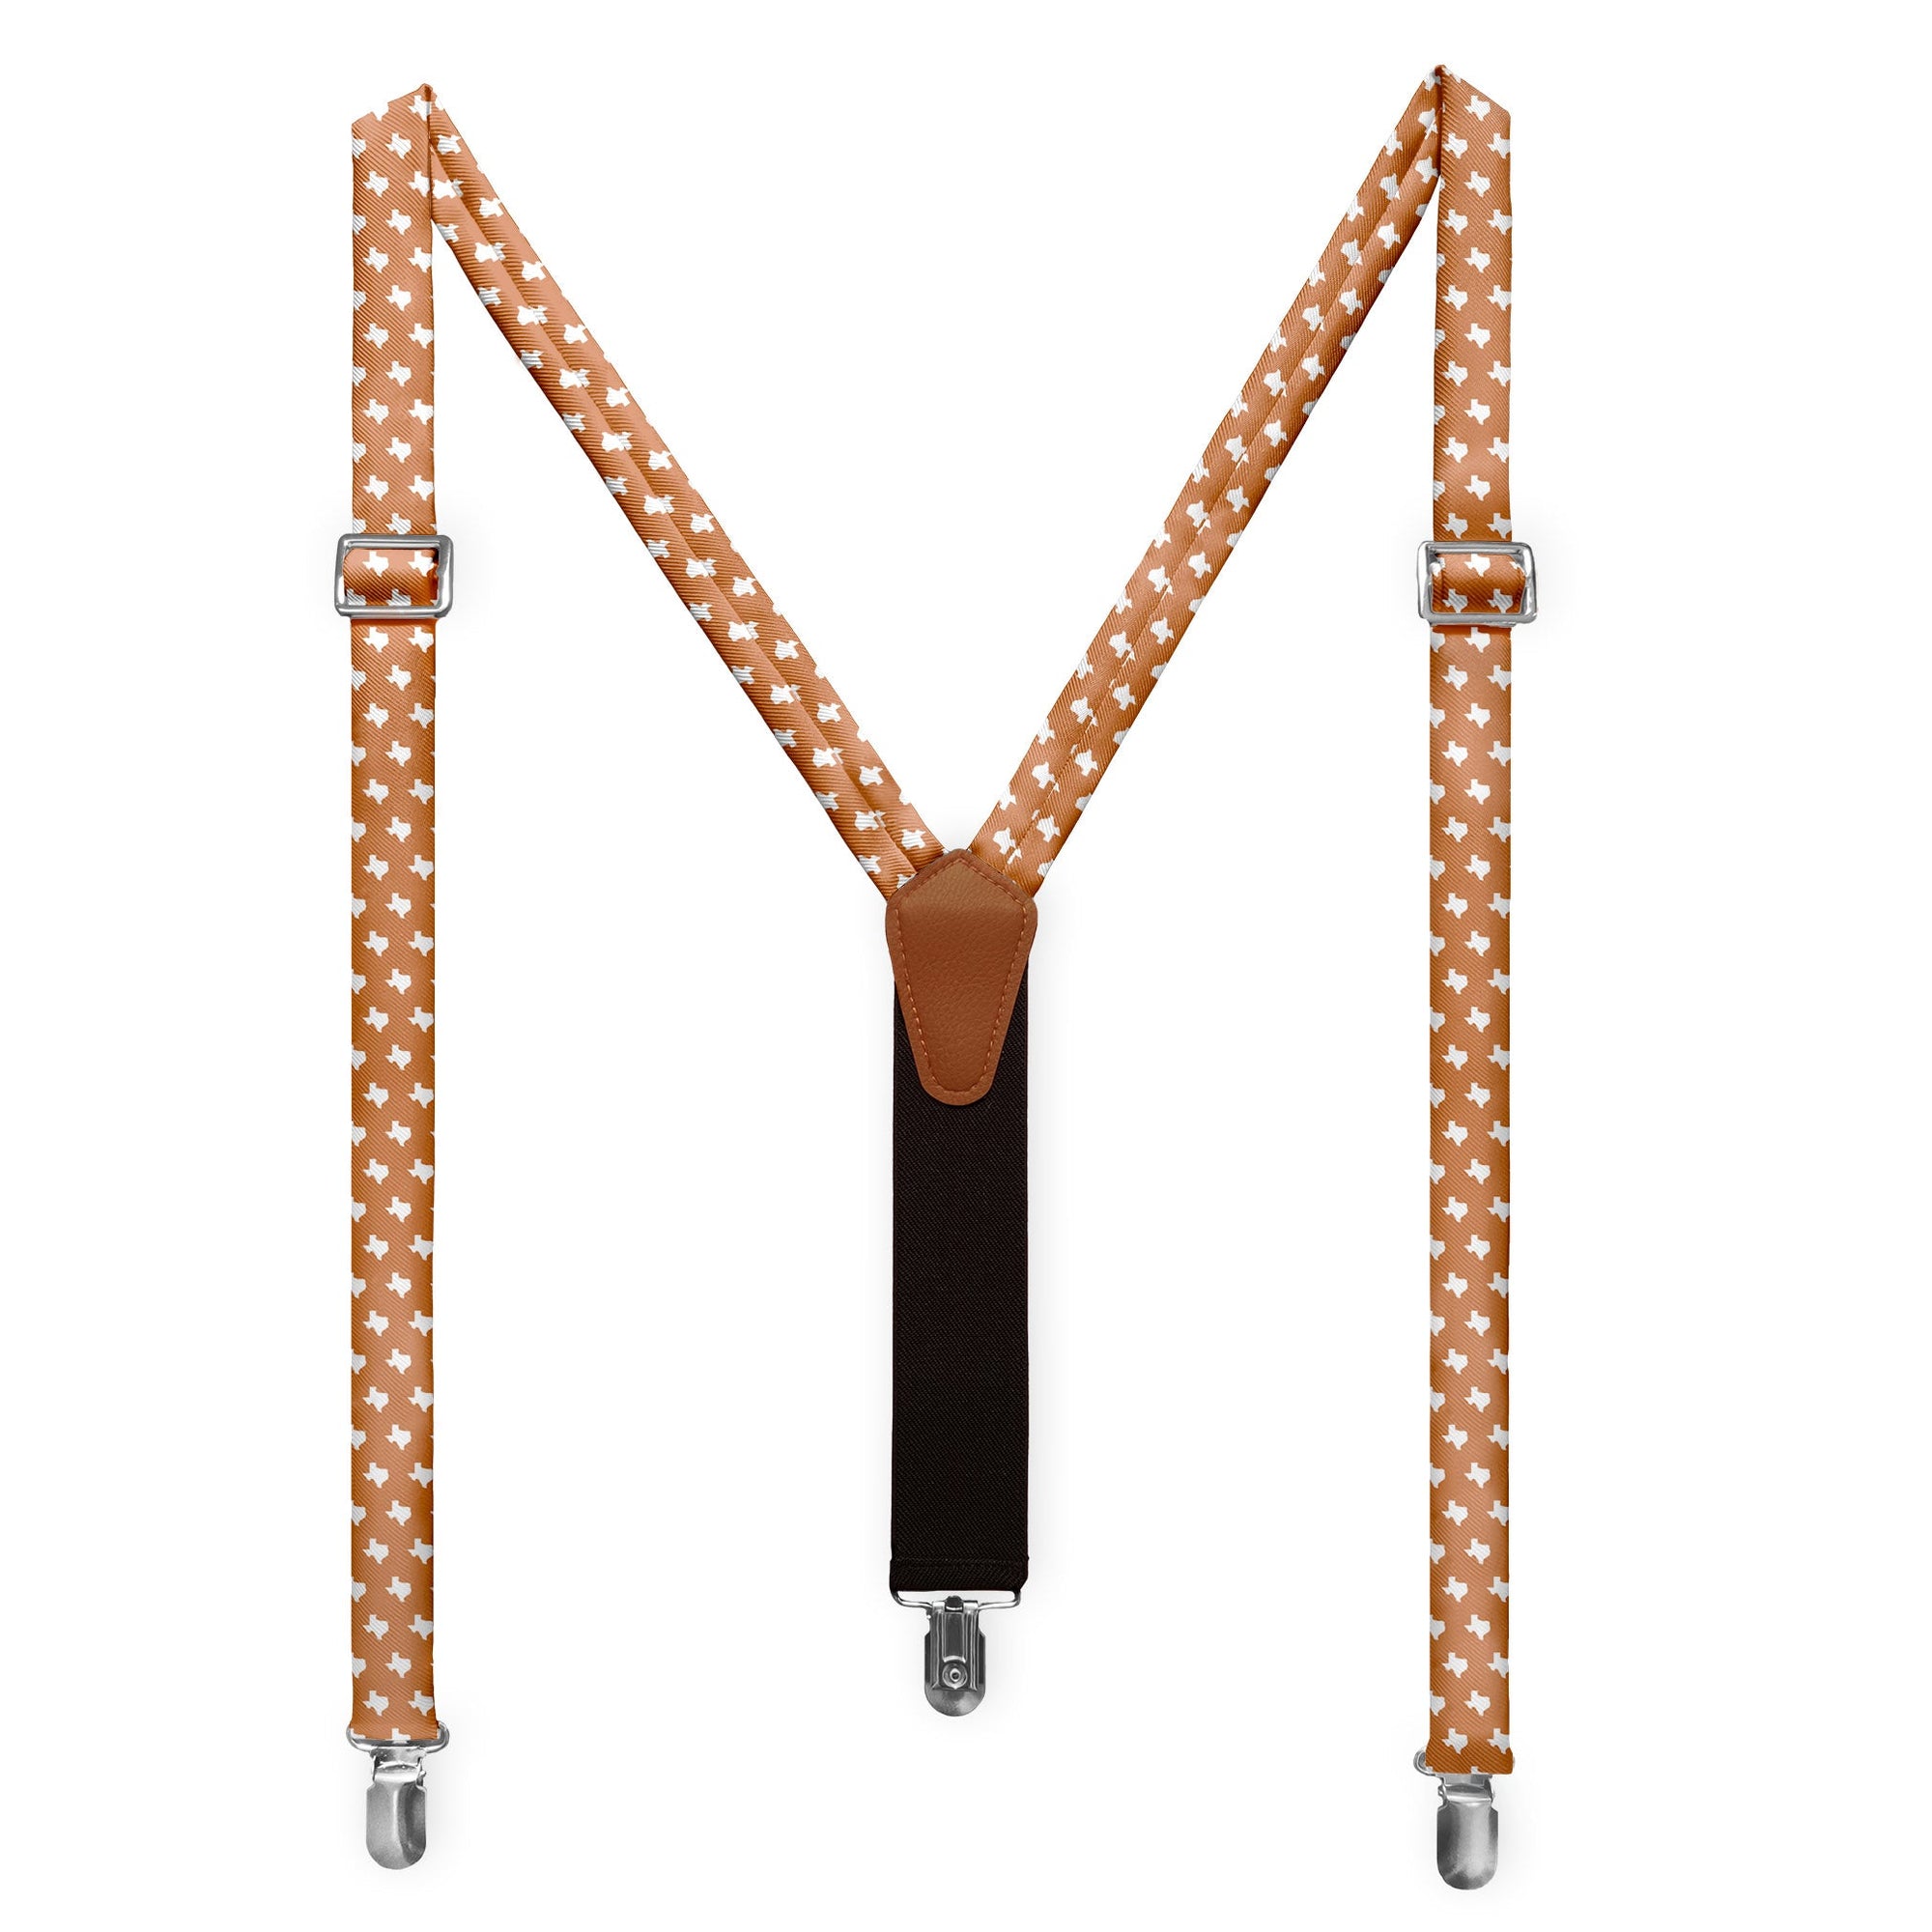 Texas State Outline Suspenders -  -  - Knotty Tie Co.